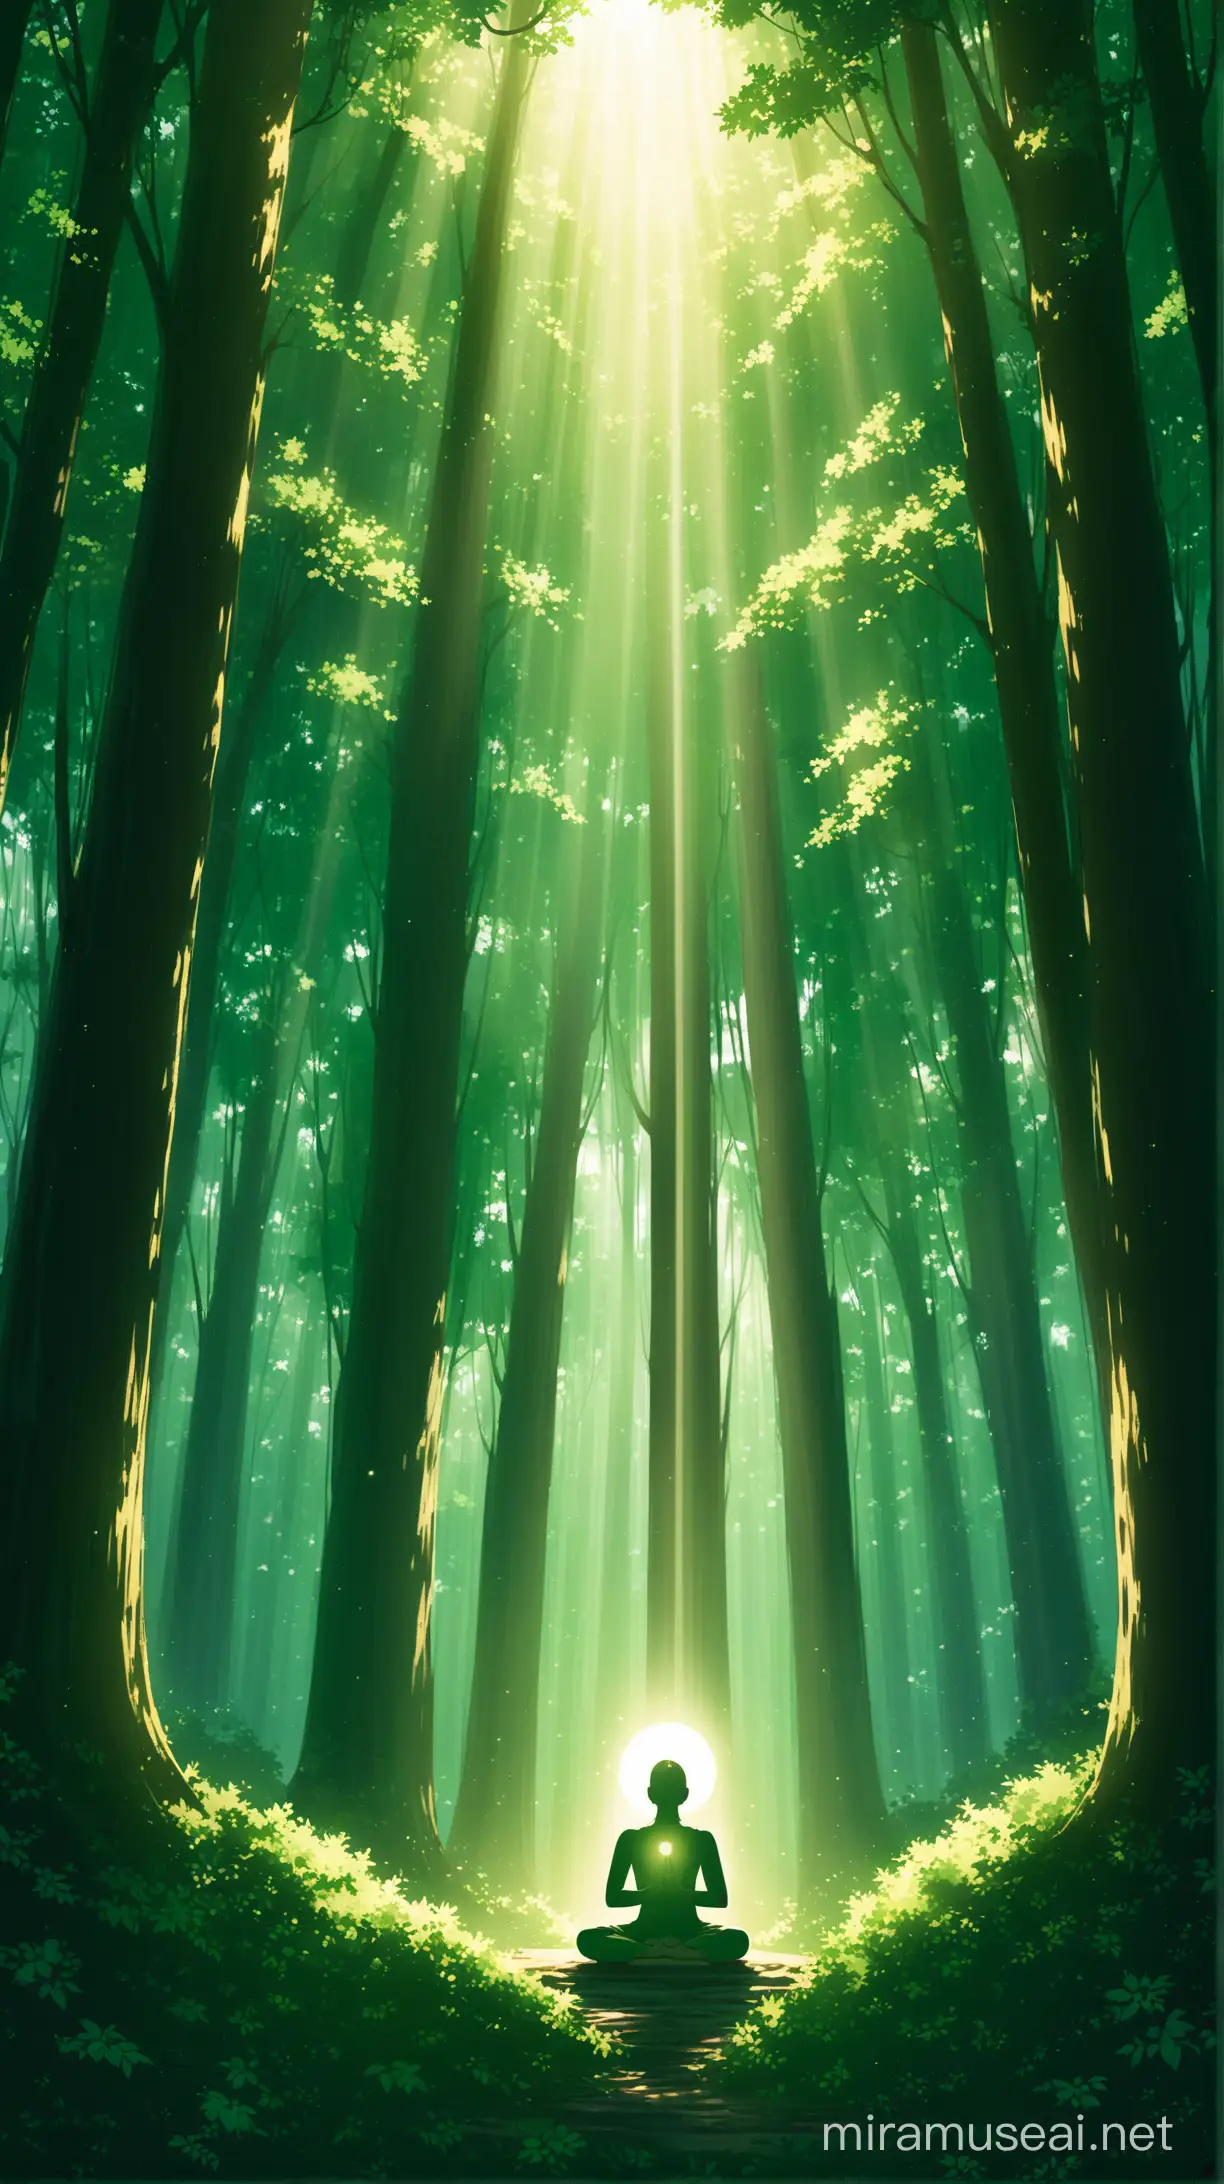 a person meditating in the deep forest with dence trees, shurbs and sun light entering into it through dark green gaps